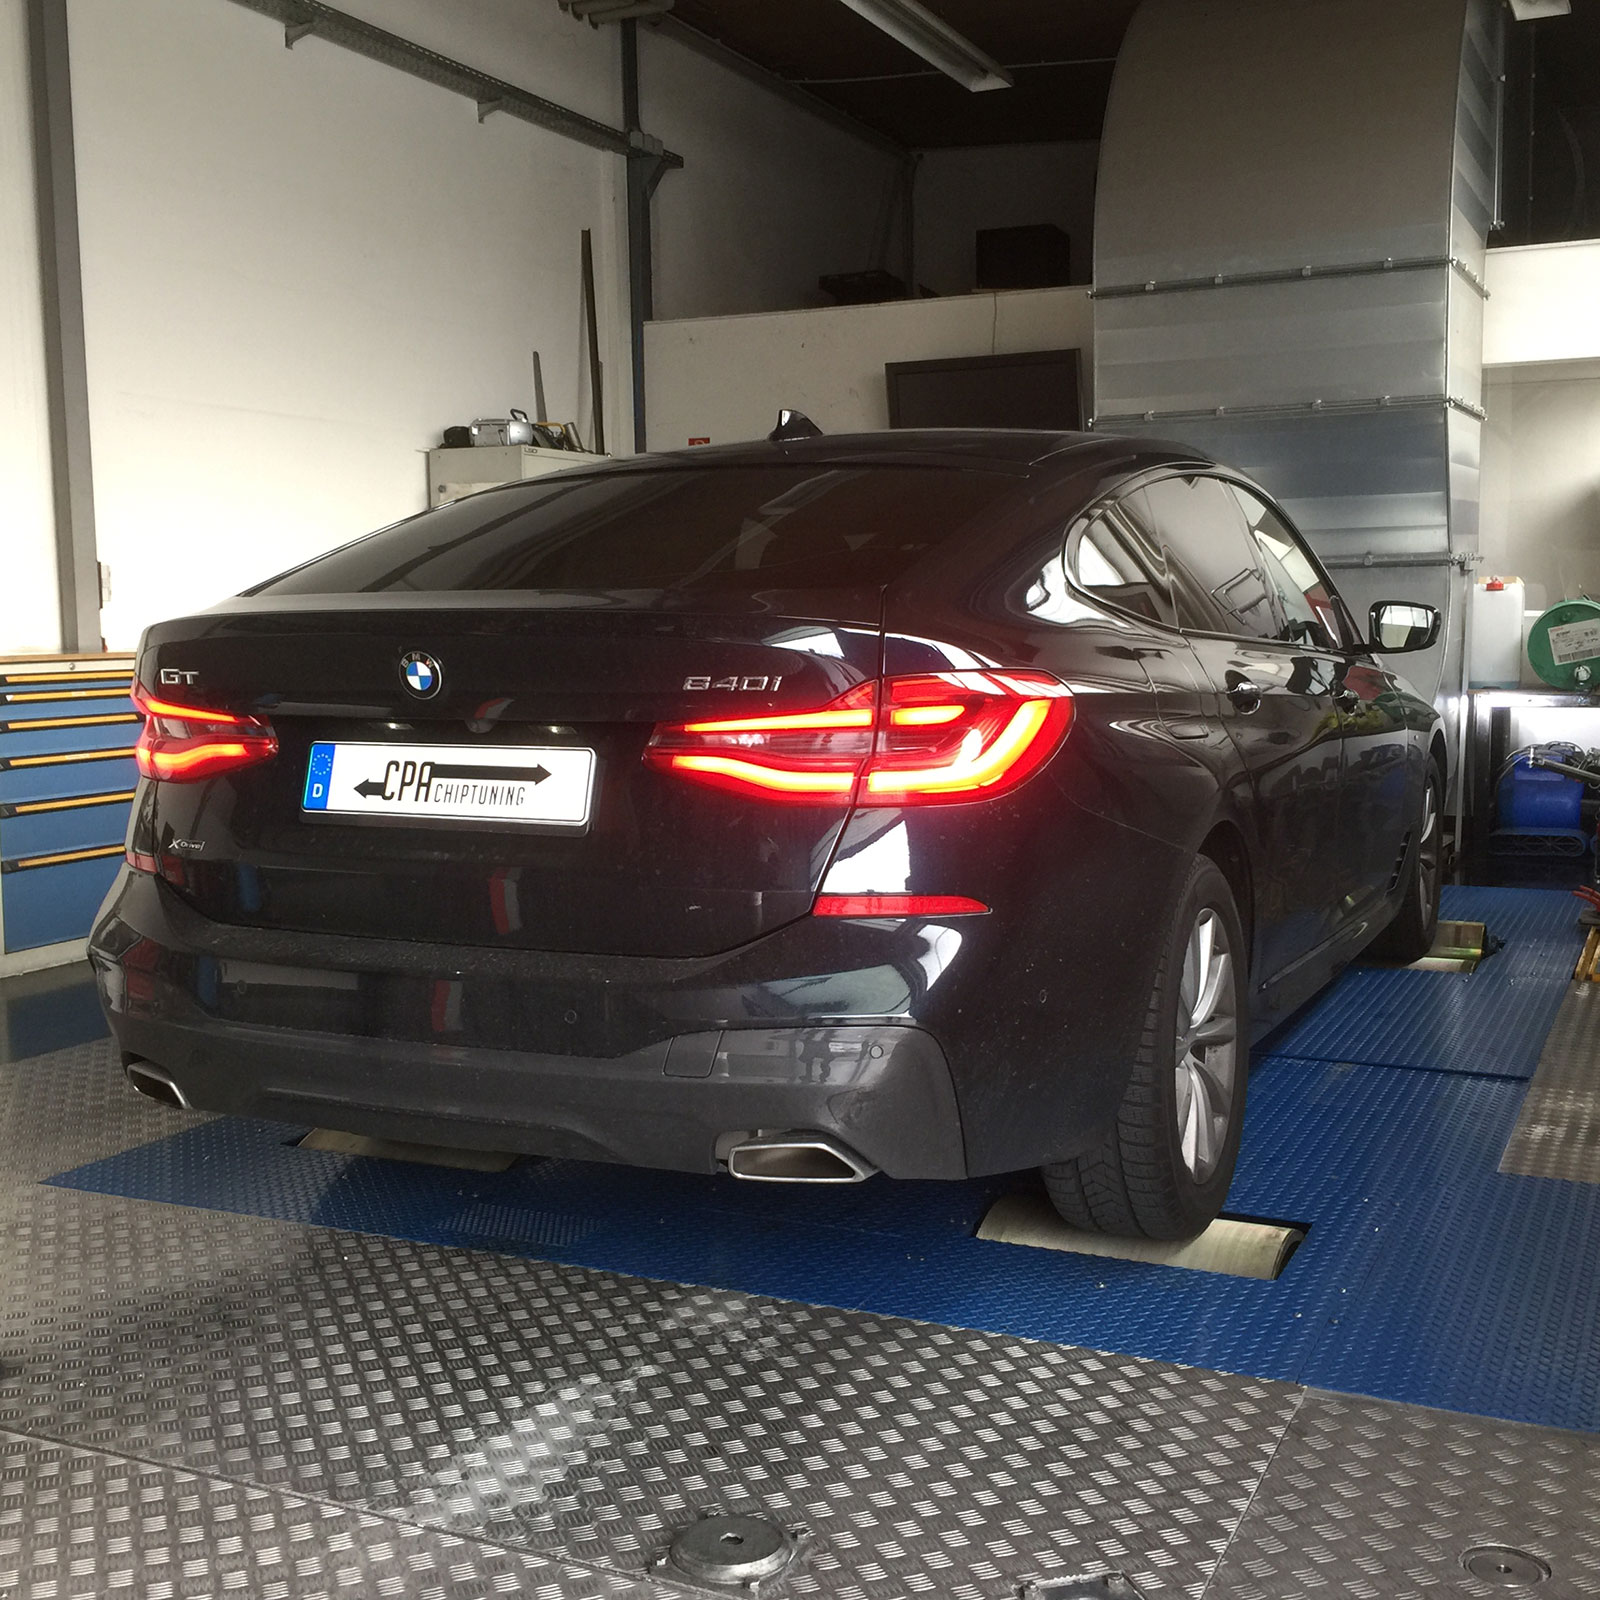 Chiptuning BMW: developed on the dyno